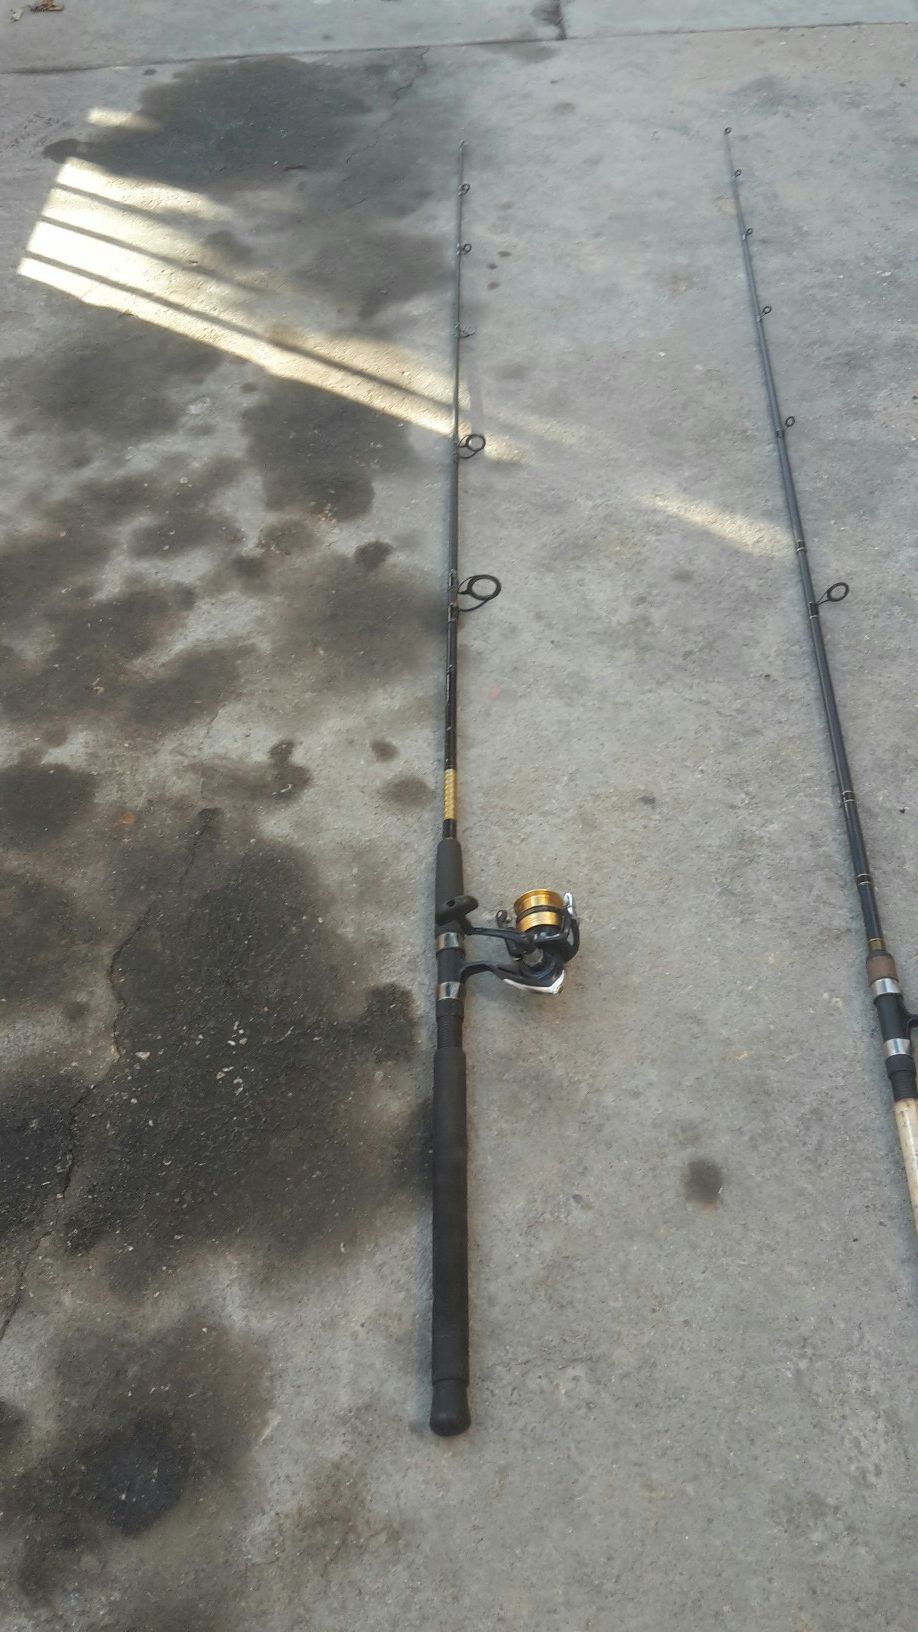 Fishing rod and spinning reel